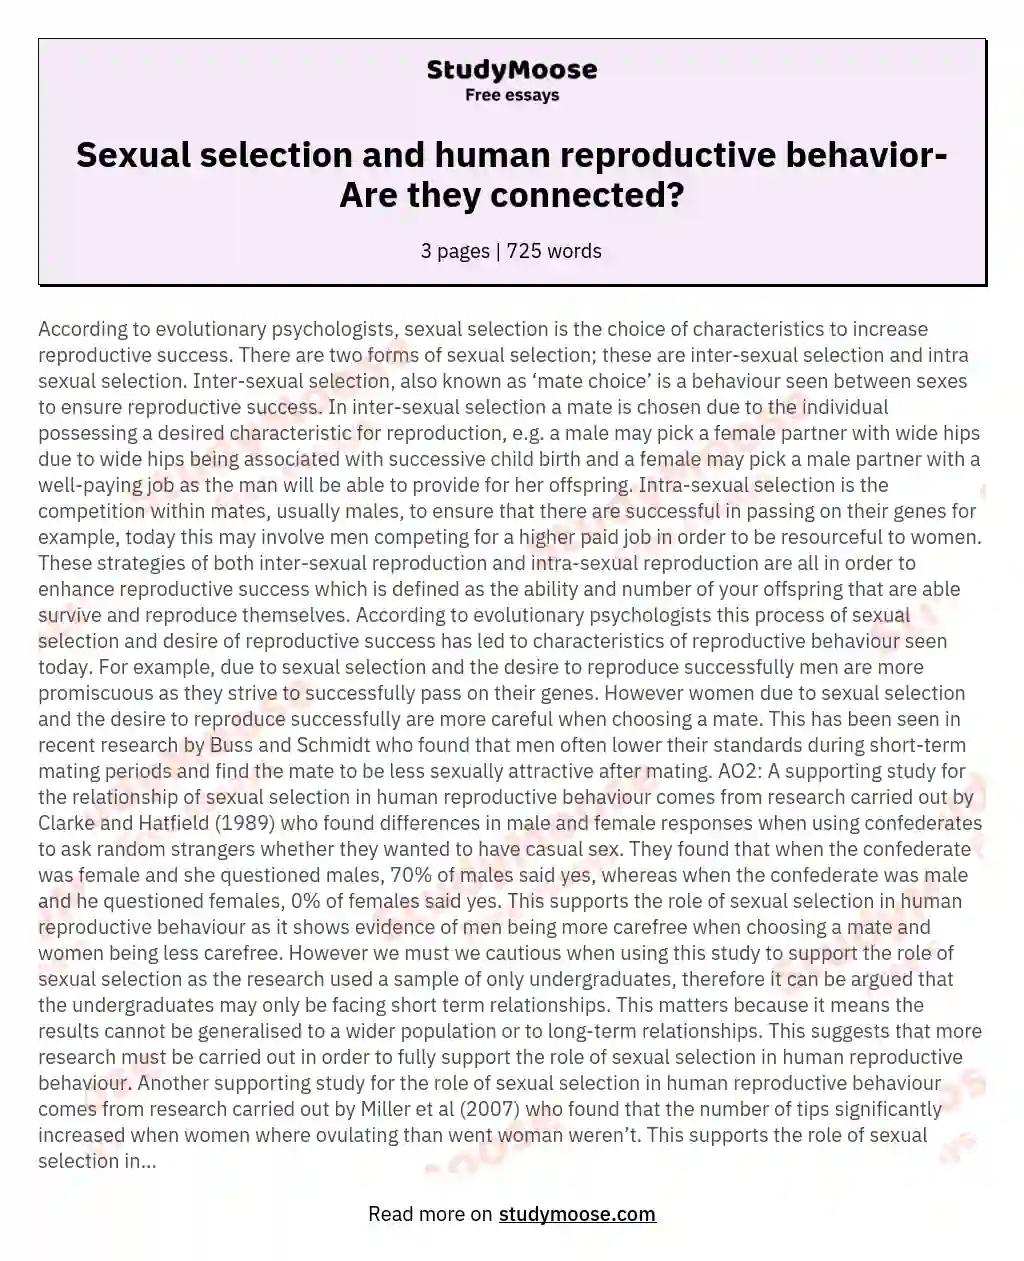 Sexual selection and human reproductive behavior- Are they connected? essay